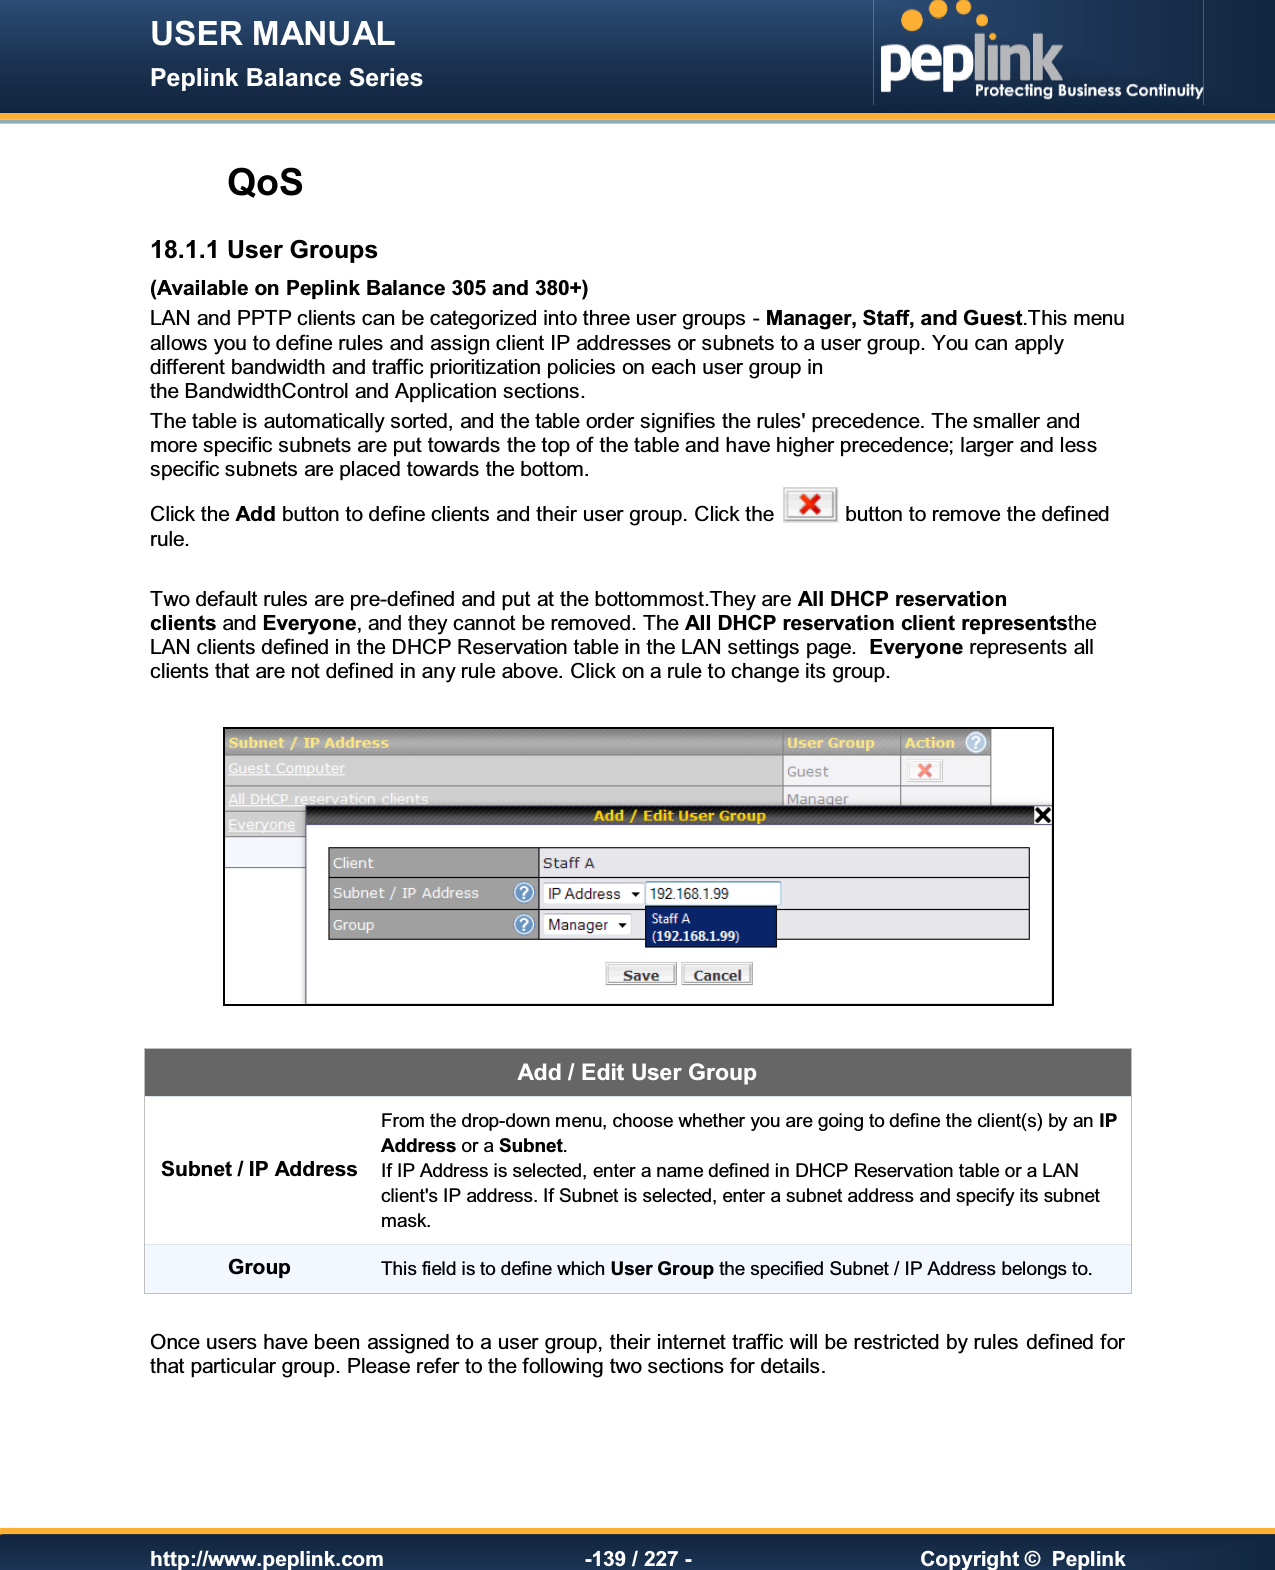 USER MANUAL Peplink Balance Series   http://www.peplink.com -139 / 227 -  Copyright ©  Peplink  QoS 18.1.1 User Groups (Available on Peplink Balance 305 and 380+) LAN and PPTP clients can be categorized into three user groups - Manager, Staff, and Guest.This menu allows you to define rules and assign client IP addresses or subnets to a user group. You can apply different bandwidth and traffic prioritization policies on each user group in the BandwidthControl and Application sections. The table is automatically sorted, and the table order signifies the rules&apos; precedence. The smaller and more specific subnets are put towards the top of the table and have higher precedence; larger and less specific subnets are placed towards the bottom. Click the Add button to define clients and their user group. Click the   button to remove the defined rule.  Two default rules are pre-defined and put at the bottommost.They are All DHCP reservation clients and Everyone, and they cannot be removed. The All DHCP reservation client representsthe LAN clients defined in the DHCP Reservation table in the LAN settings page.  Everyone represents all clients that are not defined in any rule above. Click on a rule to change its group.     Add / Edit User Group Subnet / IP Address From the drop-down menu, choose whether you are going to define the client(s) by an IP Address or a Subnet.  If IP Address is selected, enter a name defined in DHCP Reservation table or a LAN client&apos;s IP address. If Subnet is selected, enter a subnet address and specify its subnet mask. Group This field is to define which User Group the specified Subnet / IP Address belongs to.  Once users have been assigned to a user group, their internet traffic will be restricted by rules defined for that particular group. Please refer to the following two sections for details. 